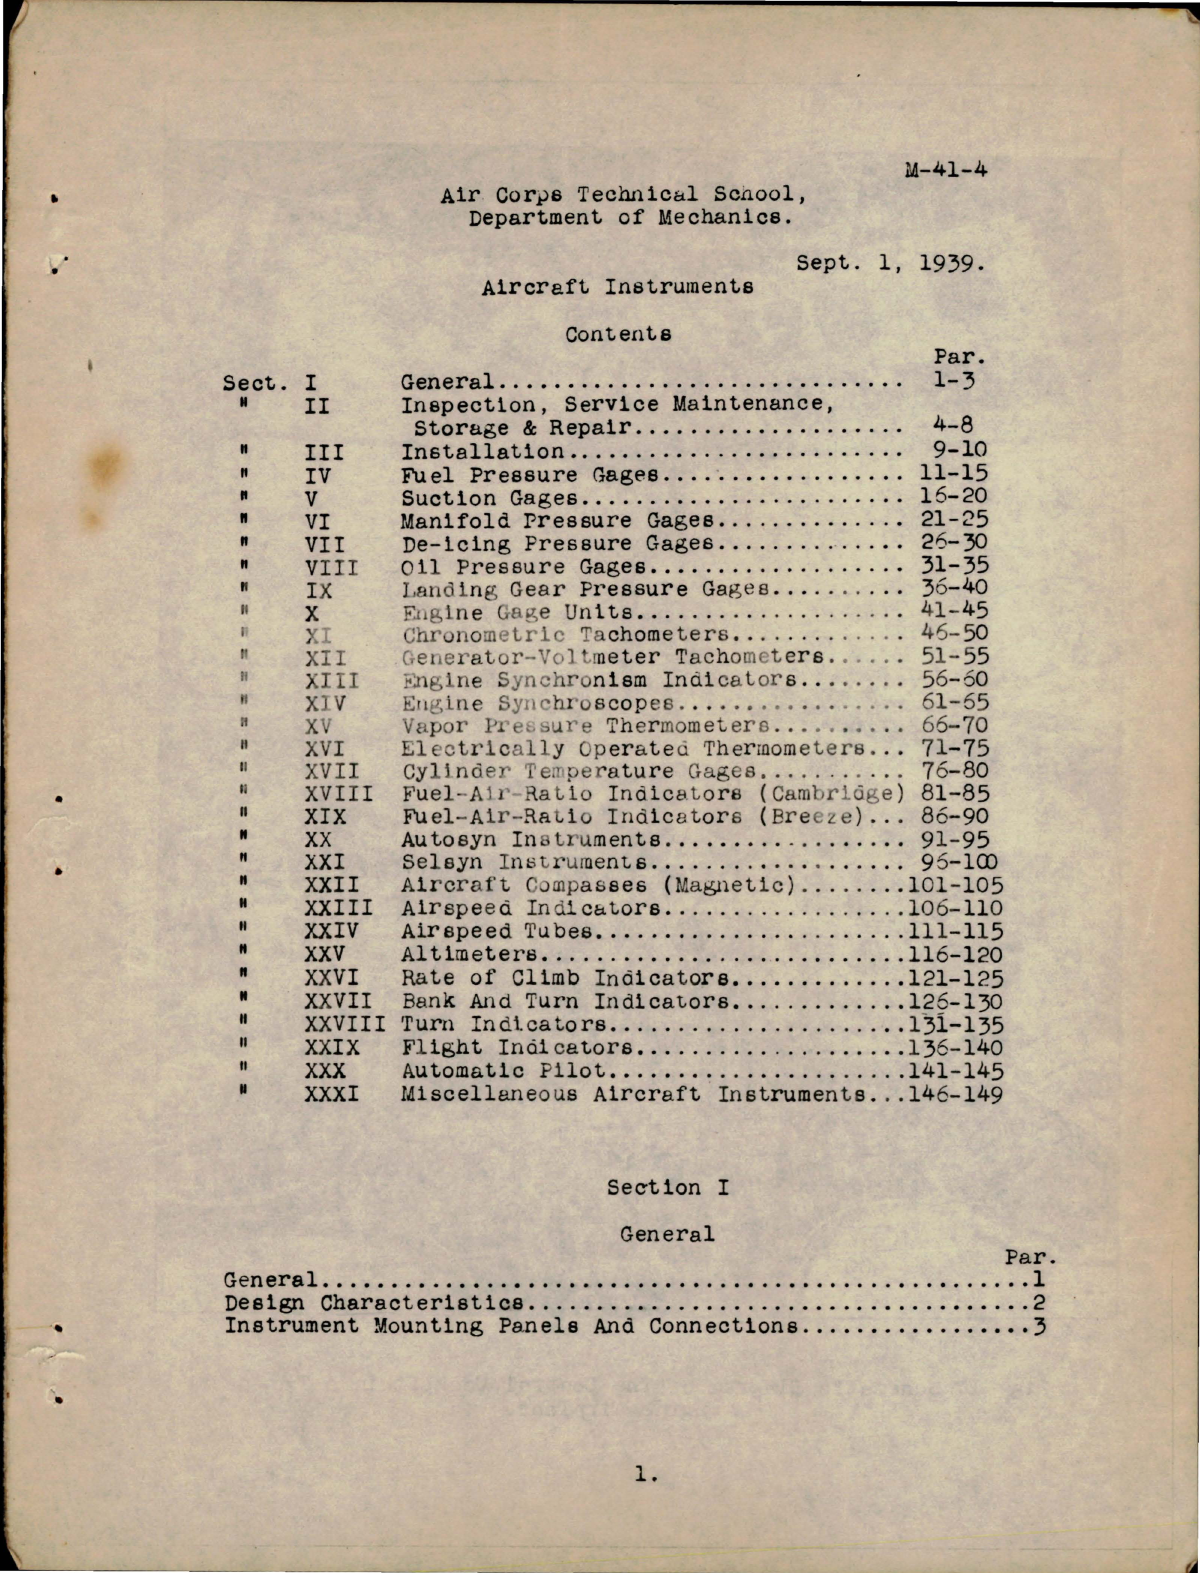 Sample page 5 from AirCorps Library document: Air Corps Technical Schools - Aircraft Instruments